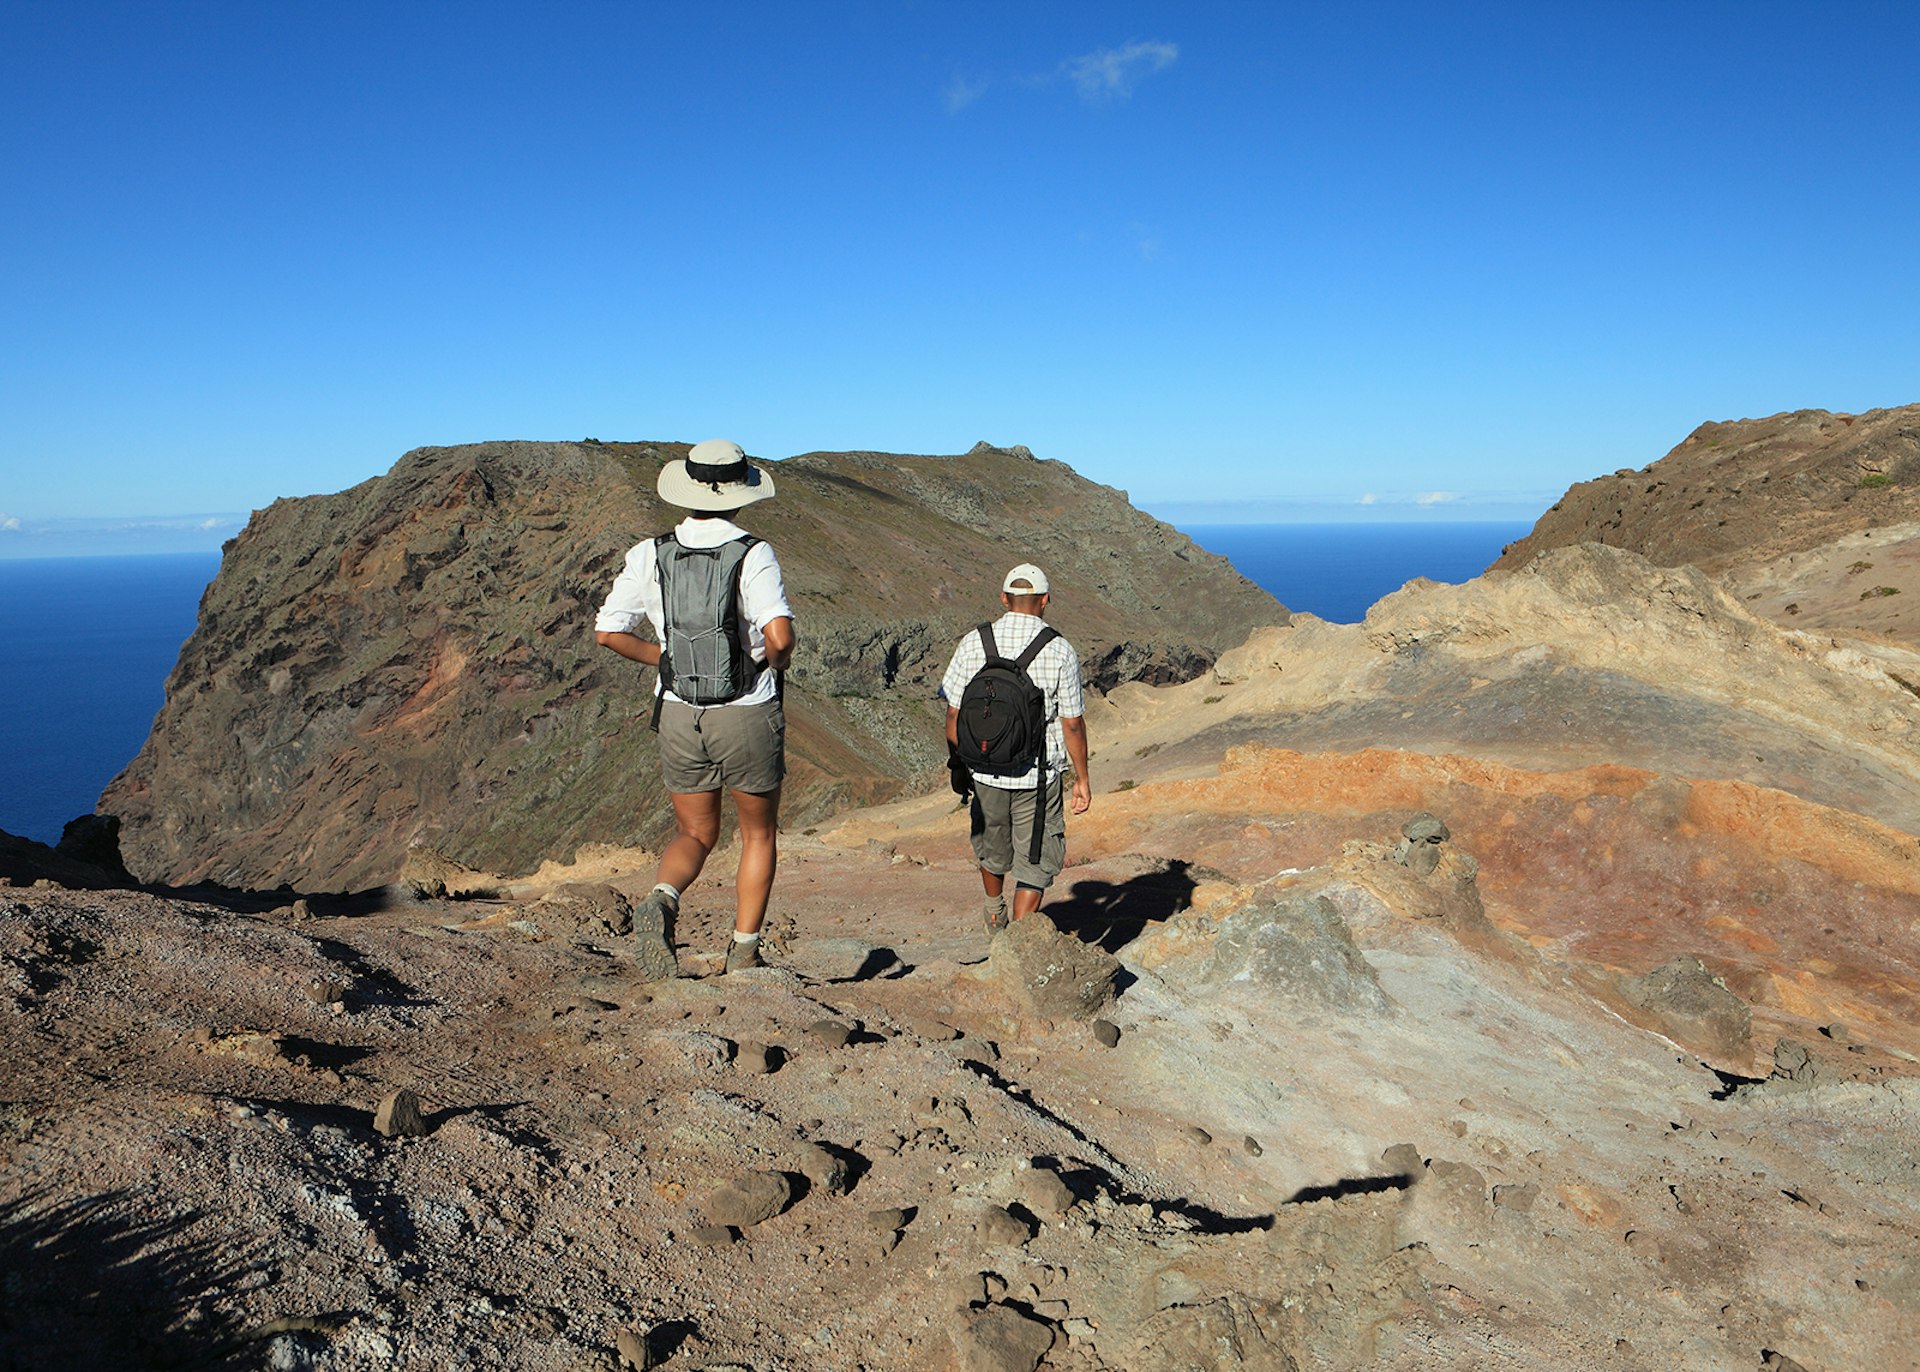 Couple hiking the volcanic craters of St Helena © Darrin Henry / Shutterstock